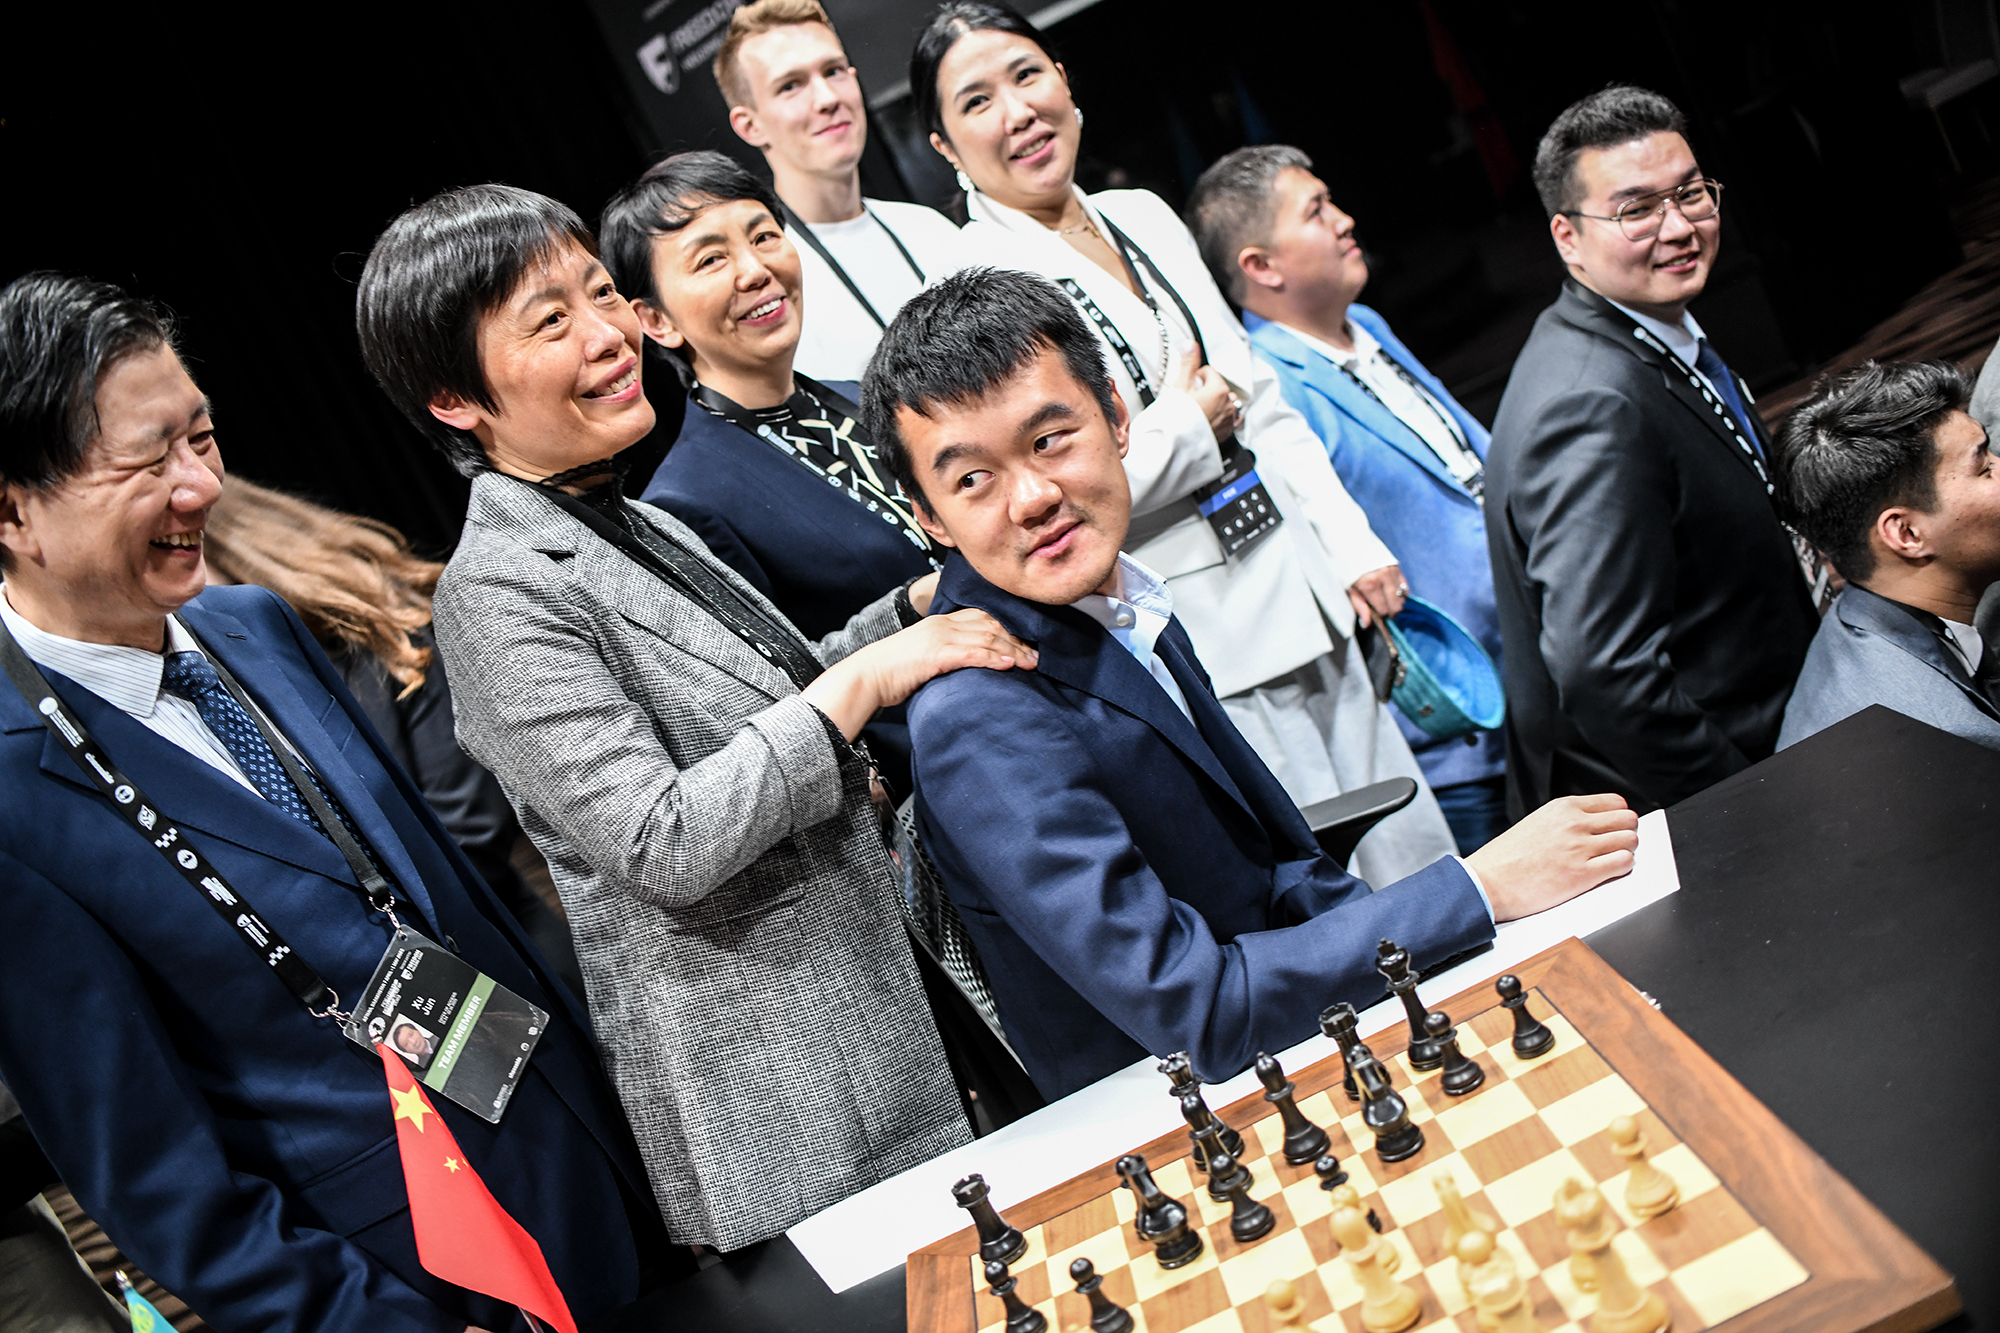 Ding Liren, the 17th World Champion at the closing ceremony in Kazakhstan :  r/chess